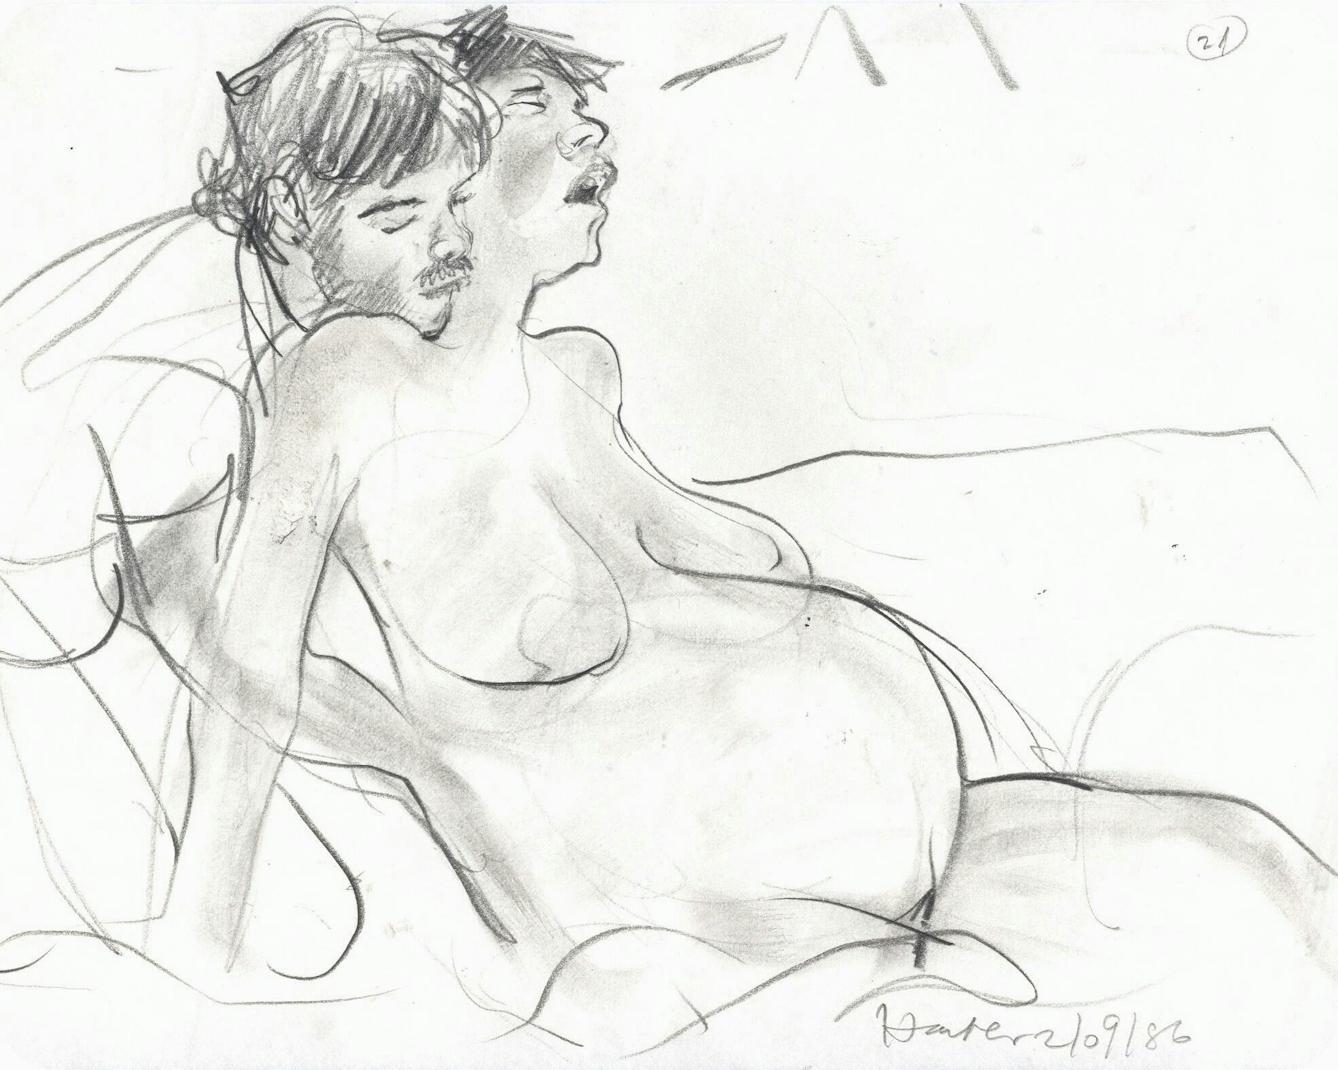 Pencil sketch showing a naked woman in labour being assisted by a man who is supporting her back. The woman's mouth is open and eyes are closed, and she appears to be in pain. 